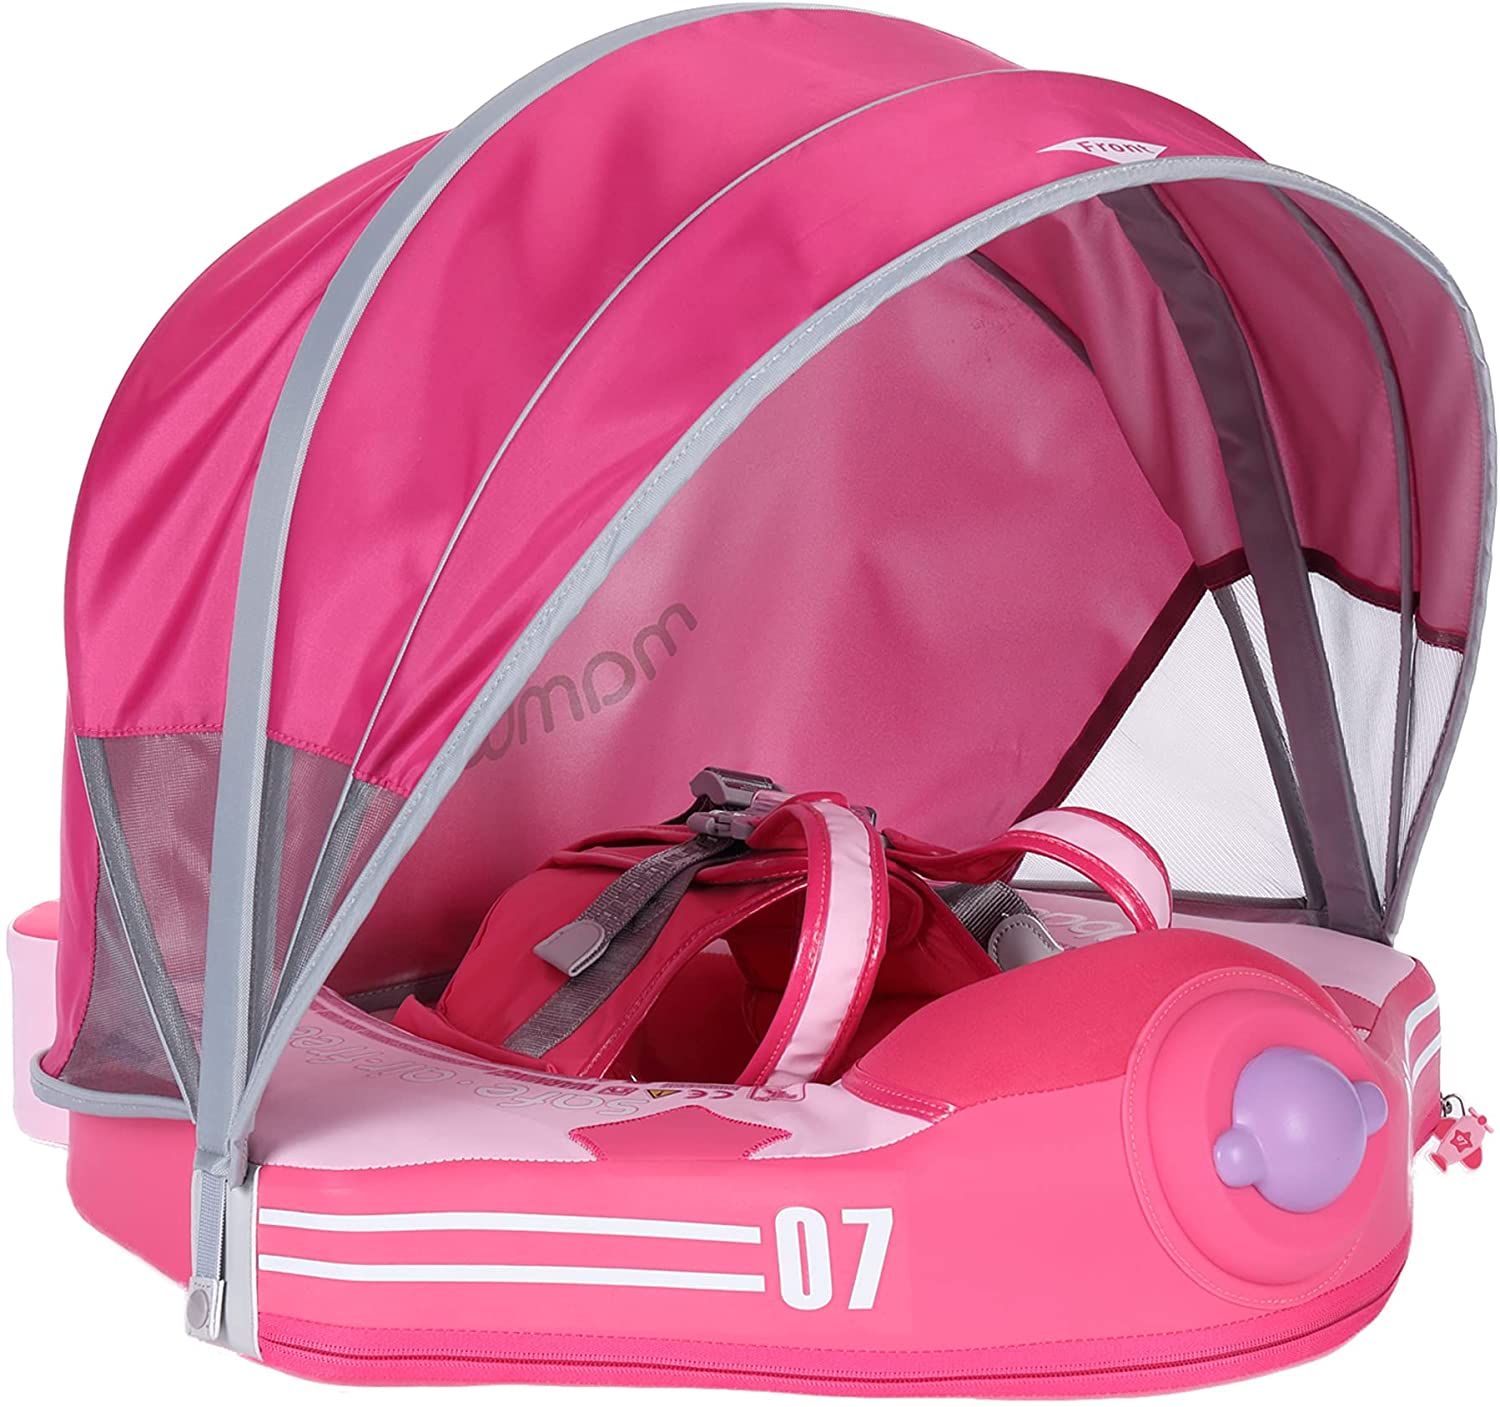 Proactive Baby Mambobaby Baby Float with Sun Canopy - Airplane Variant